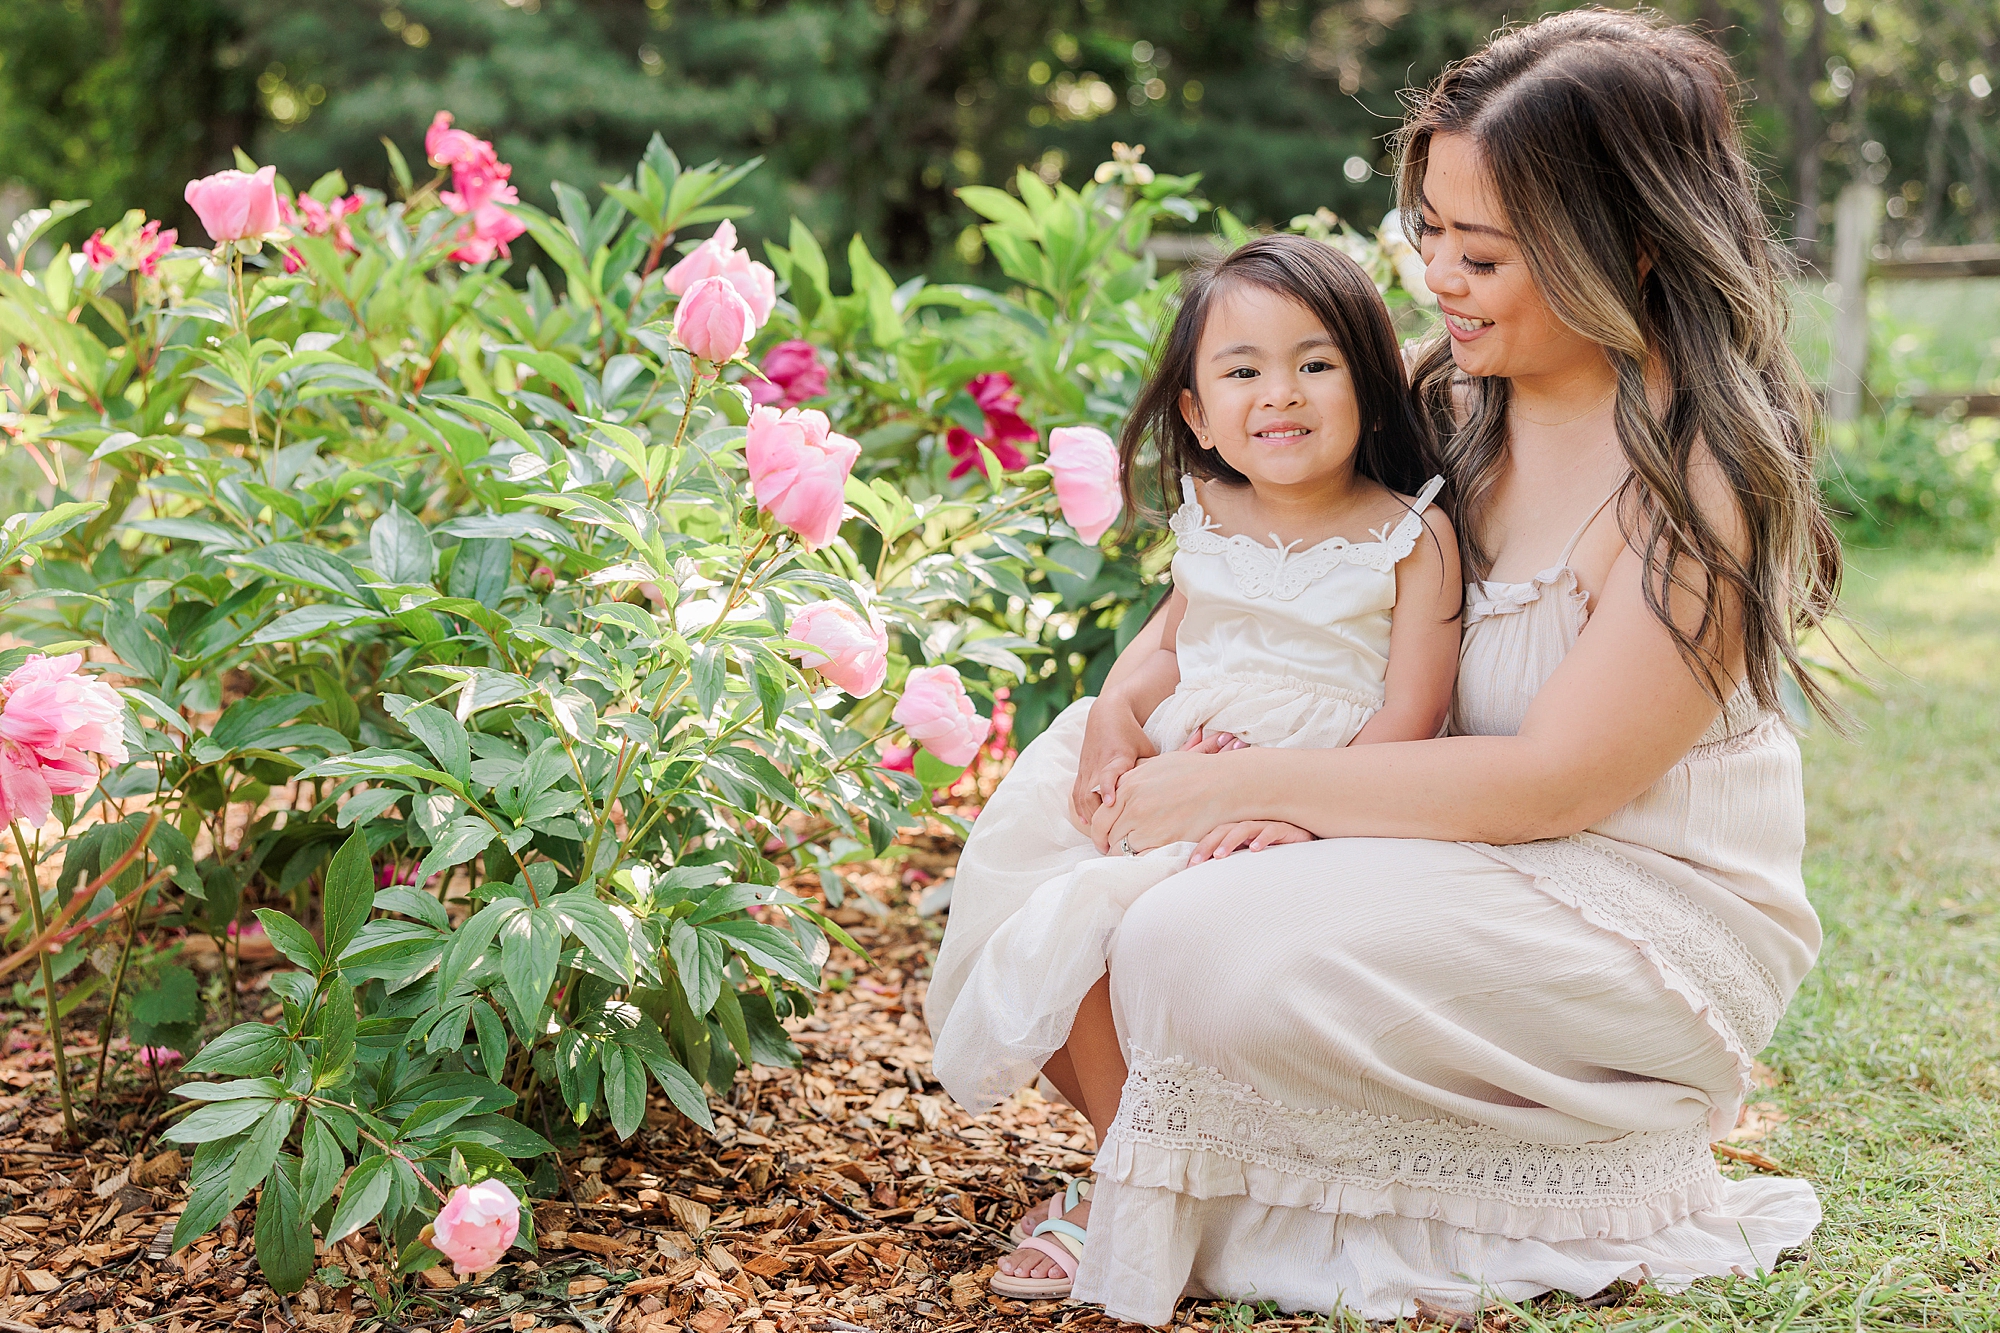 mom and daughter sit looking at flowers during mommy & me photos